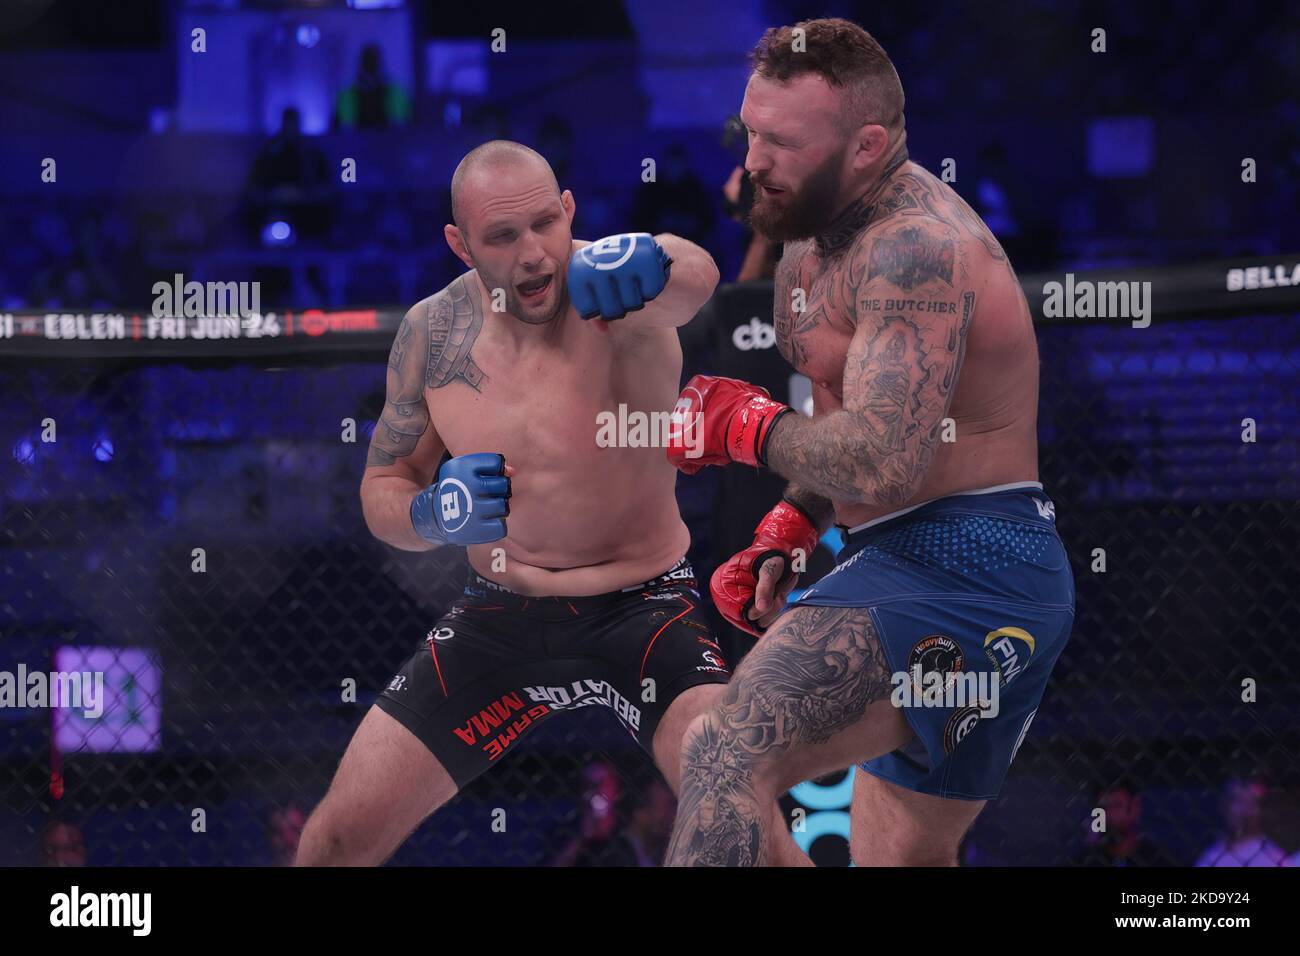 Maciej Rozanski punches Lee Chadwick during the Bellator 281: MVP vs. Storley event at the SSE Arena, Wembley, London on Friday 13th May 2022. (Photo by Pat Scaasi/MI News/NurPhoto) Stock Photo